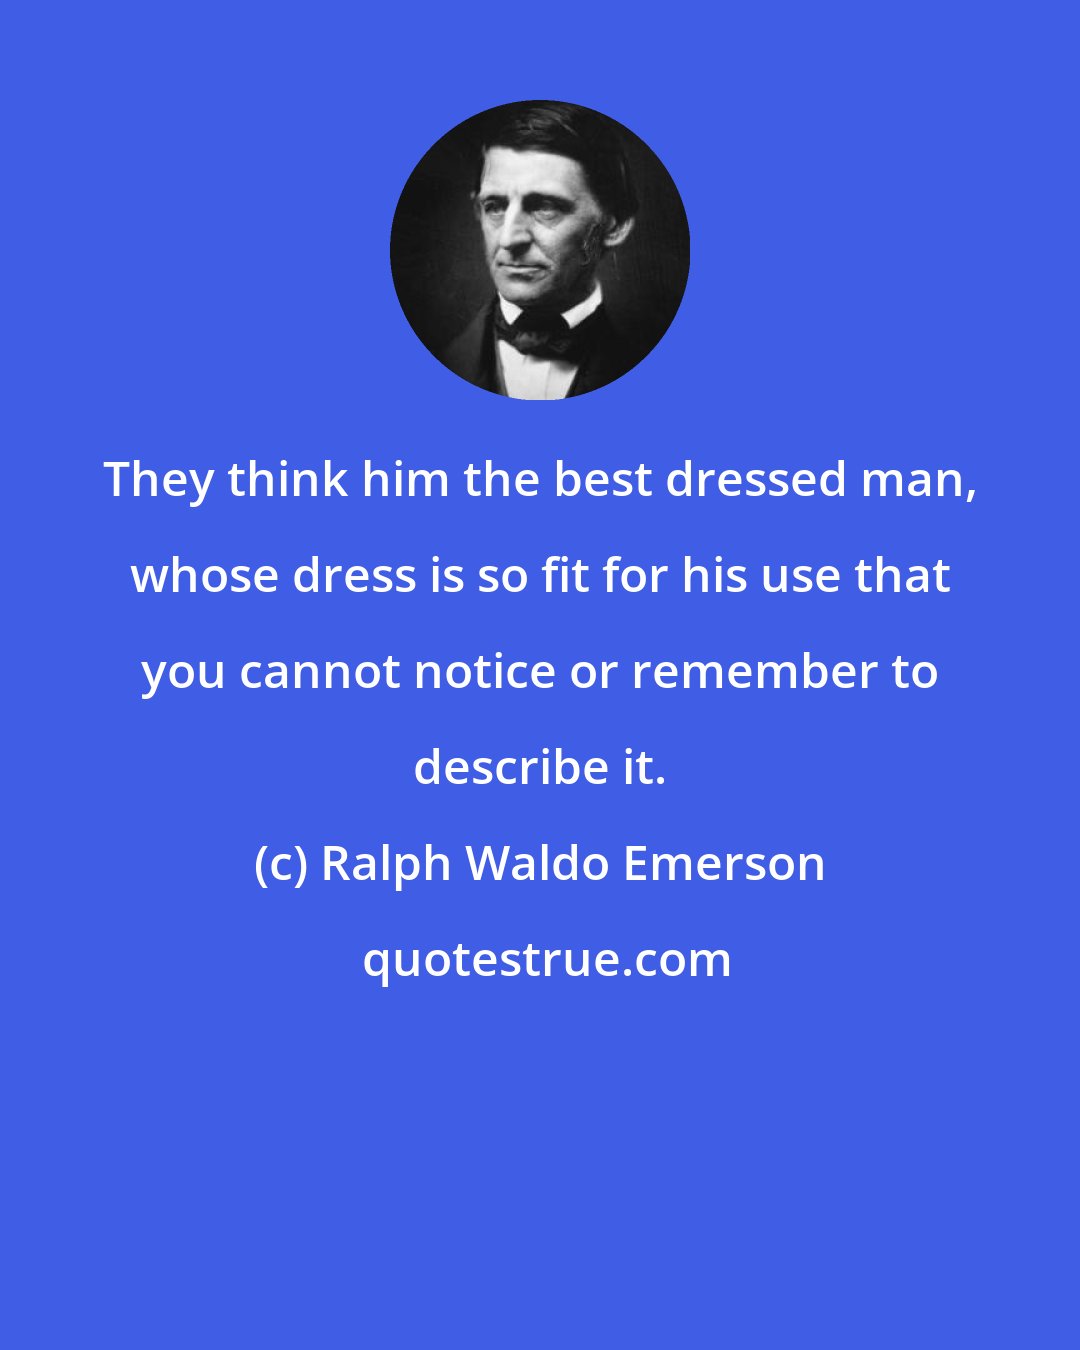 Ralph Waldo Emerson: They think him the best dressed man, whose dress is so fit for his use that you cannot notice or remember to describe it.